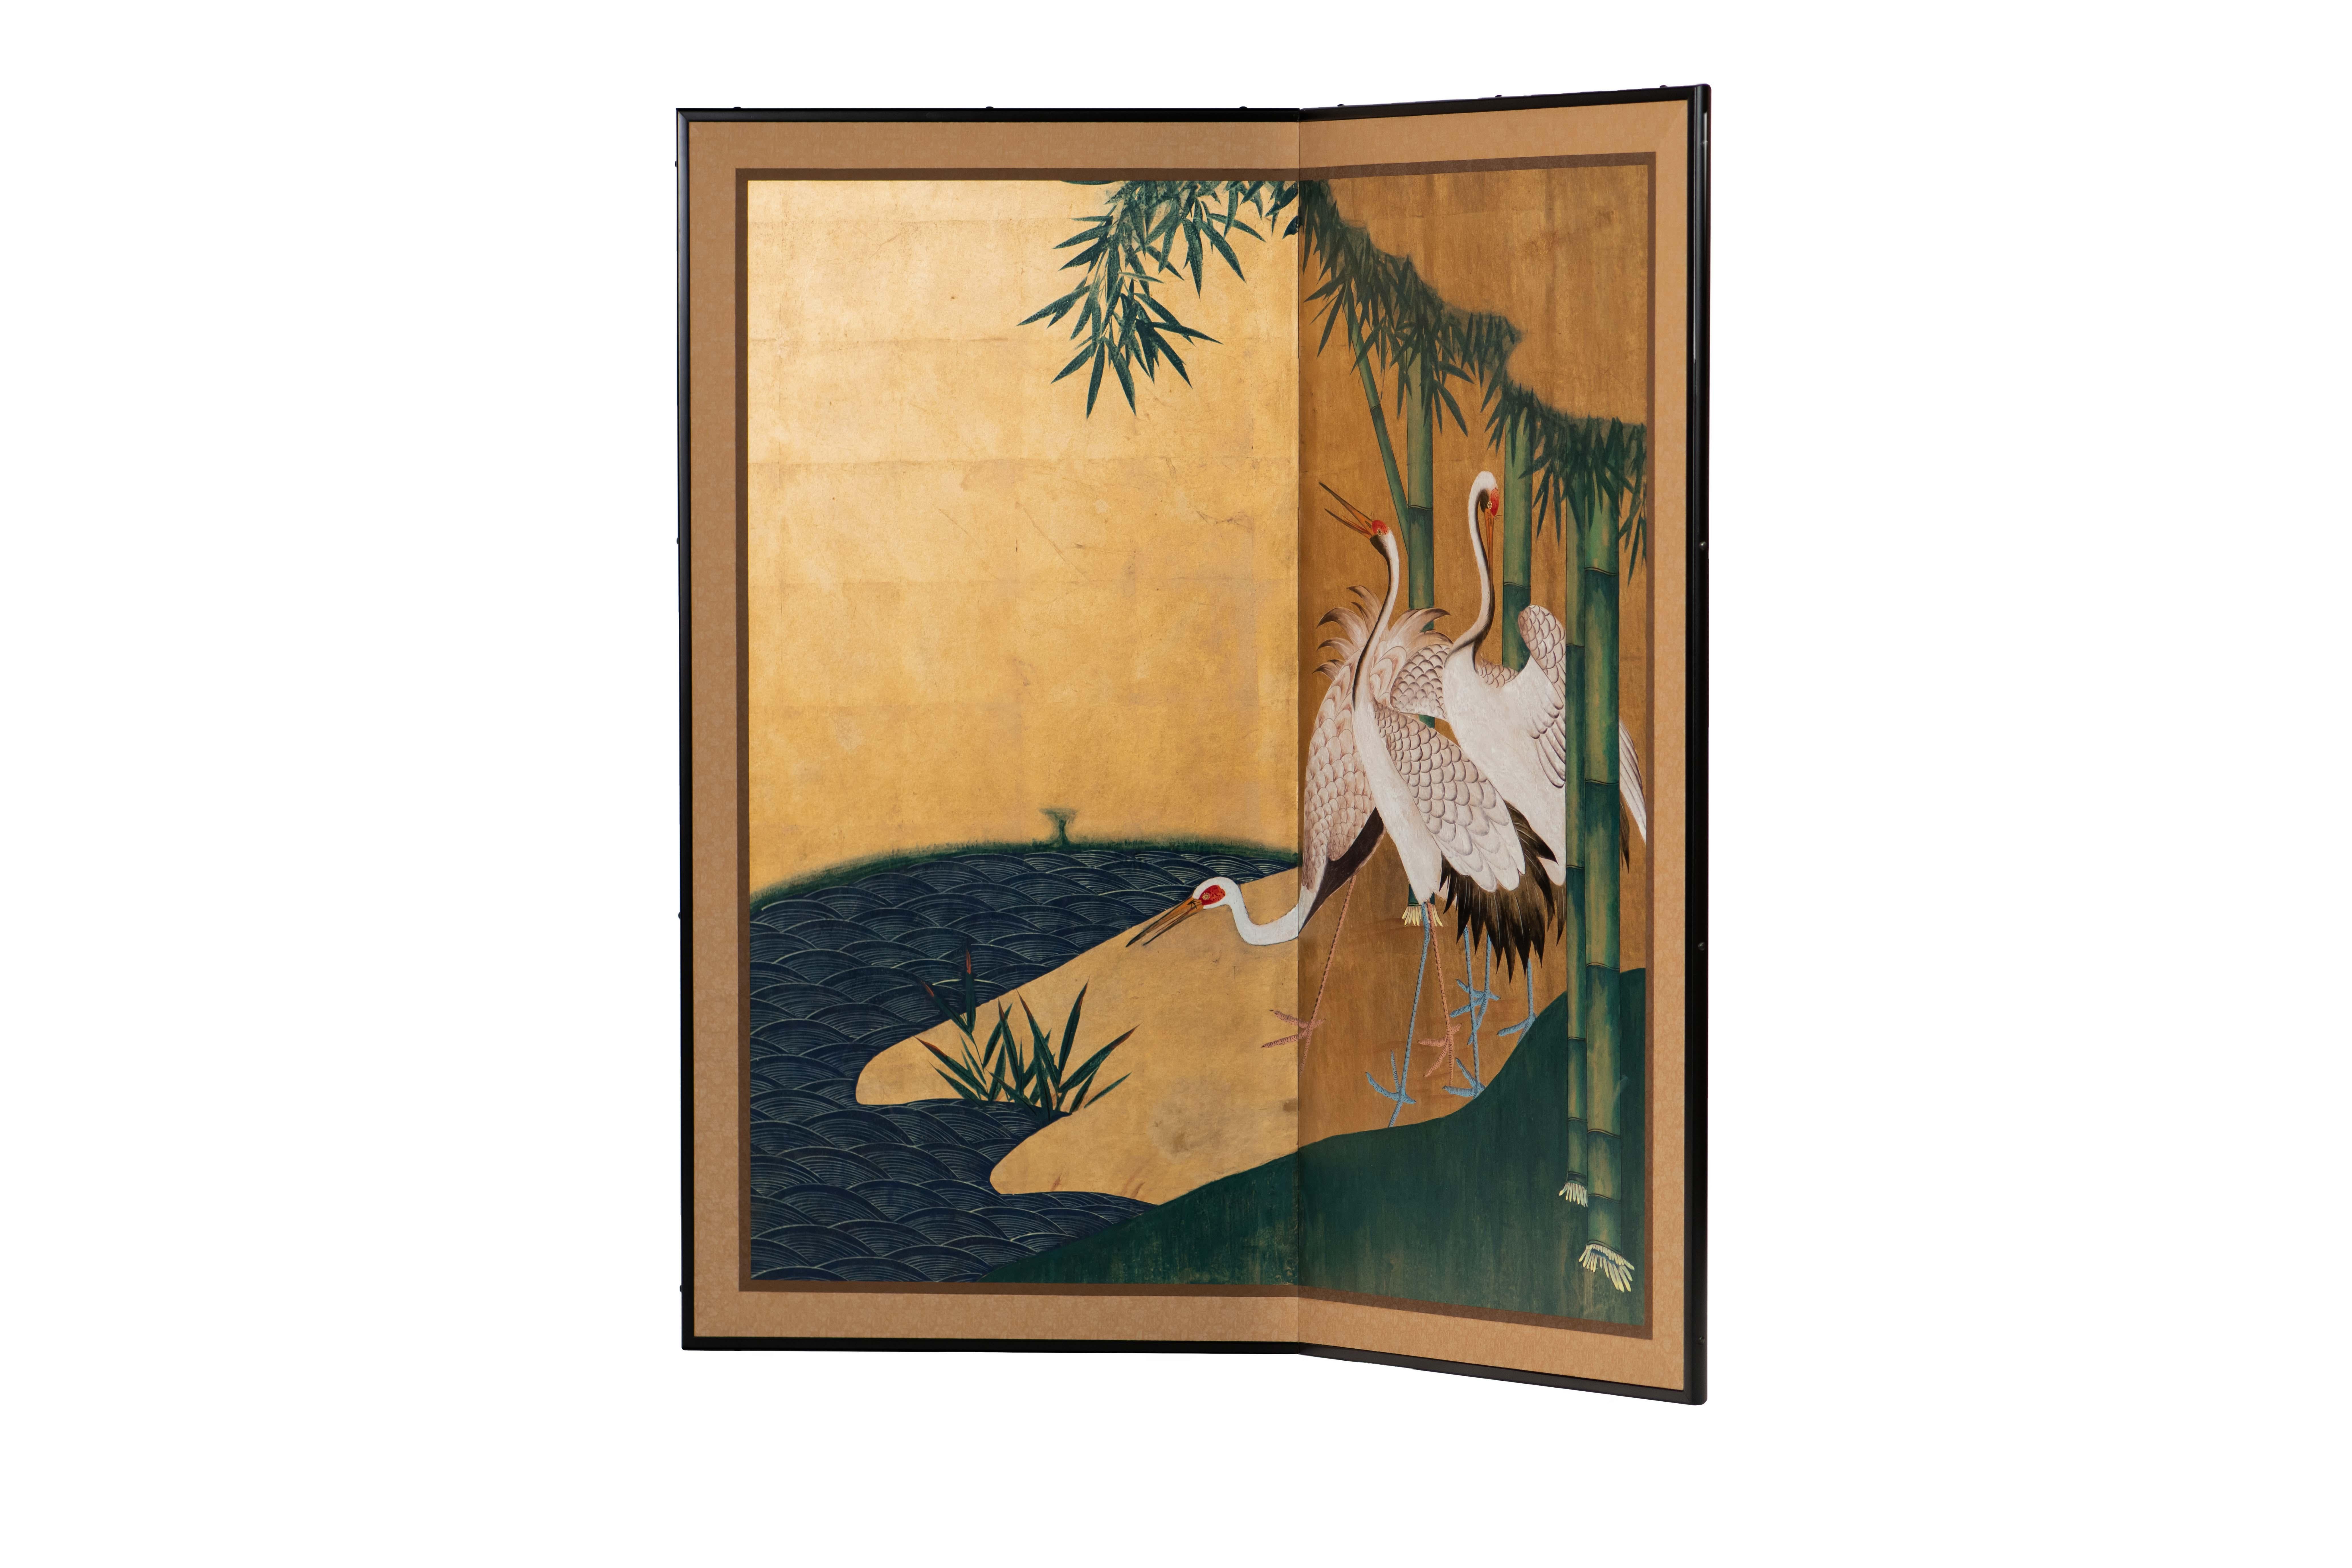 Chinese Hand Painted Japanese Folding Screen Byobu of Cranes by the River